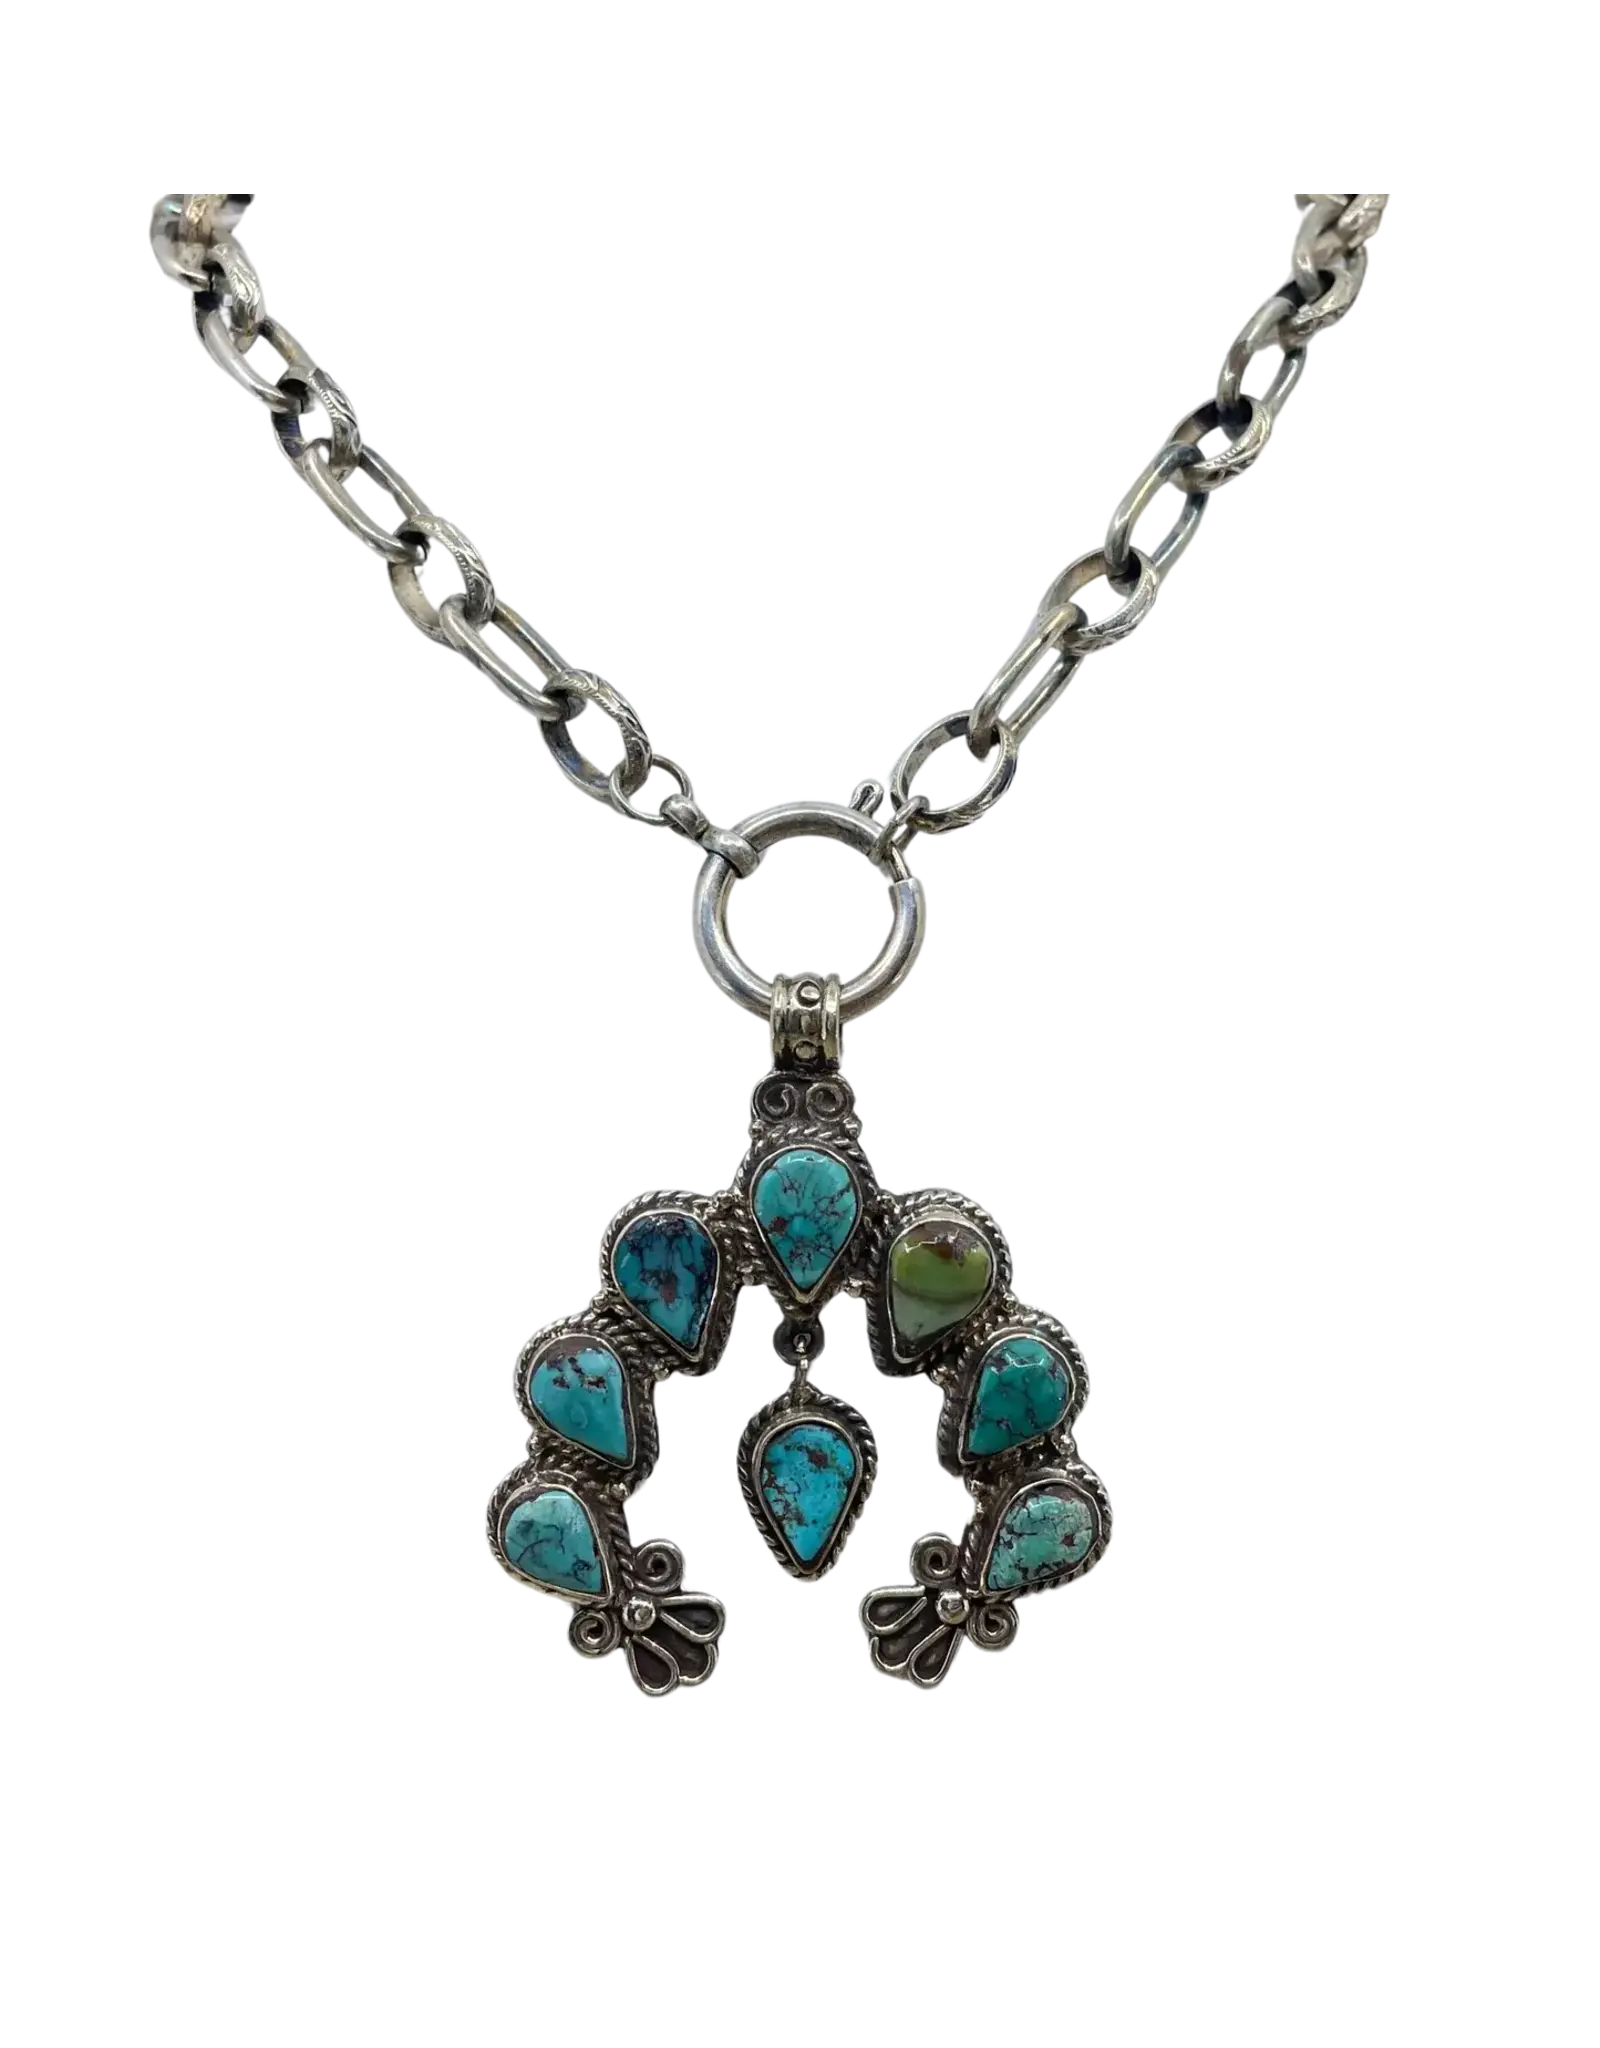 Erin Knight Vintage Turquoise Squash Blossom Pendant Necklace